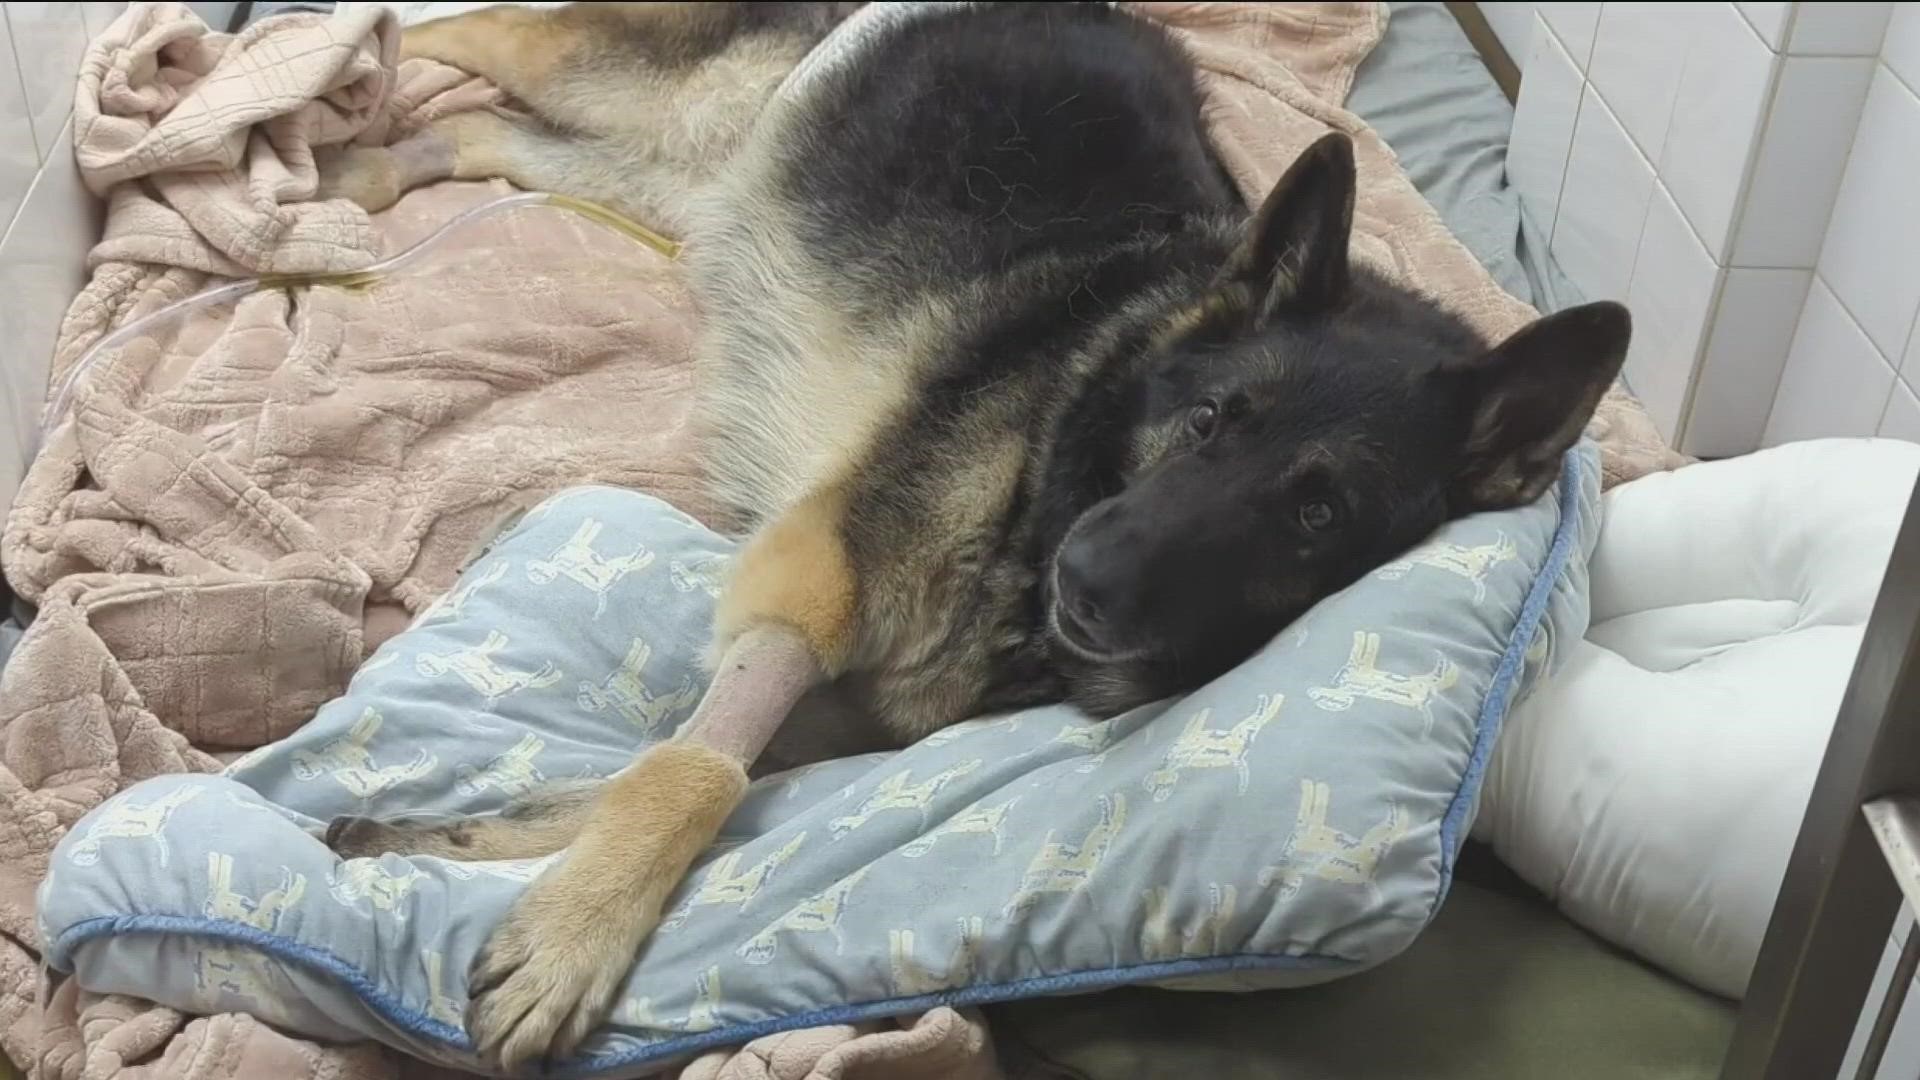 Indy’s rescuers spoke to CBS 8 about how they lifted the 9-year-old German Shepherd out of a 50-foot hole.